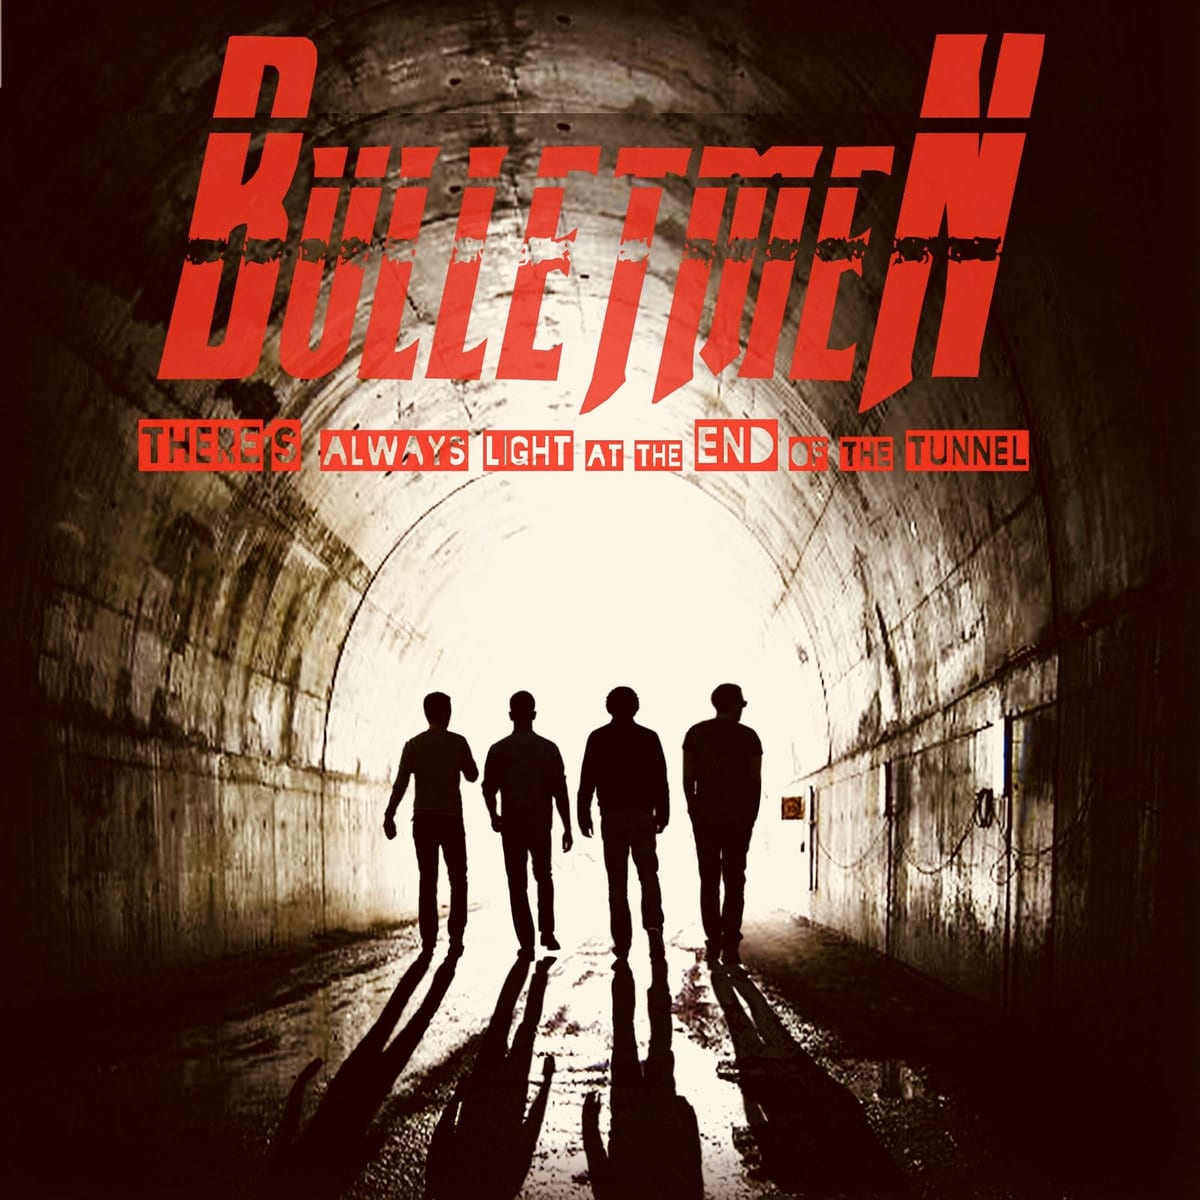 BULLETMEN – There’s always light at the end of the tunnel